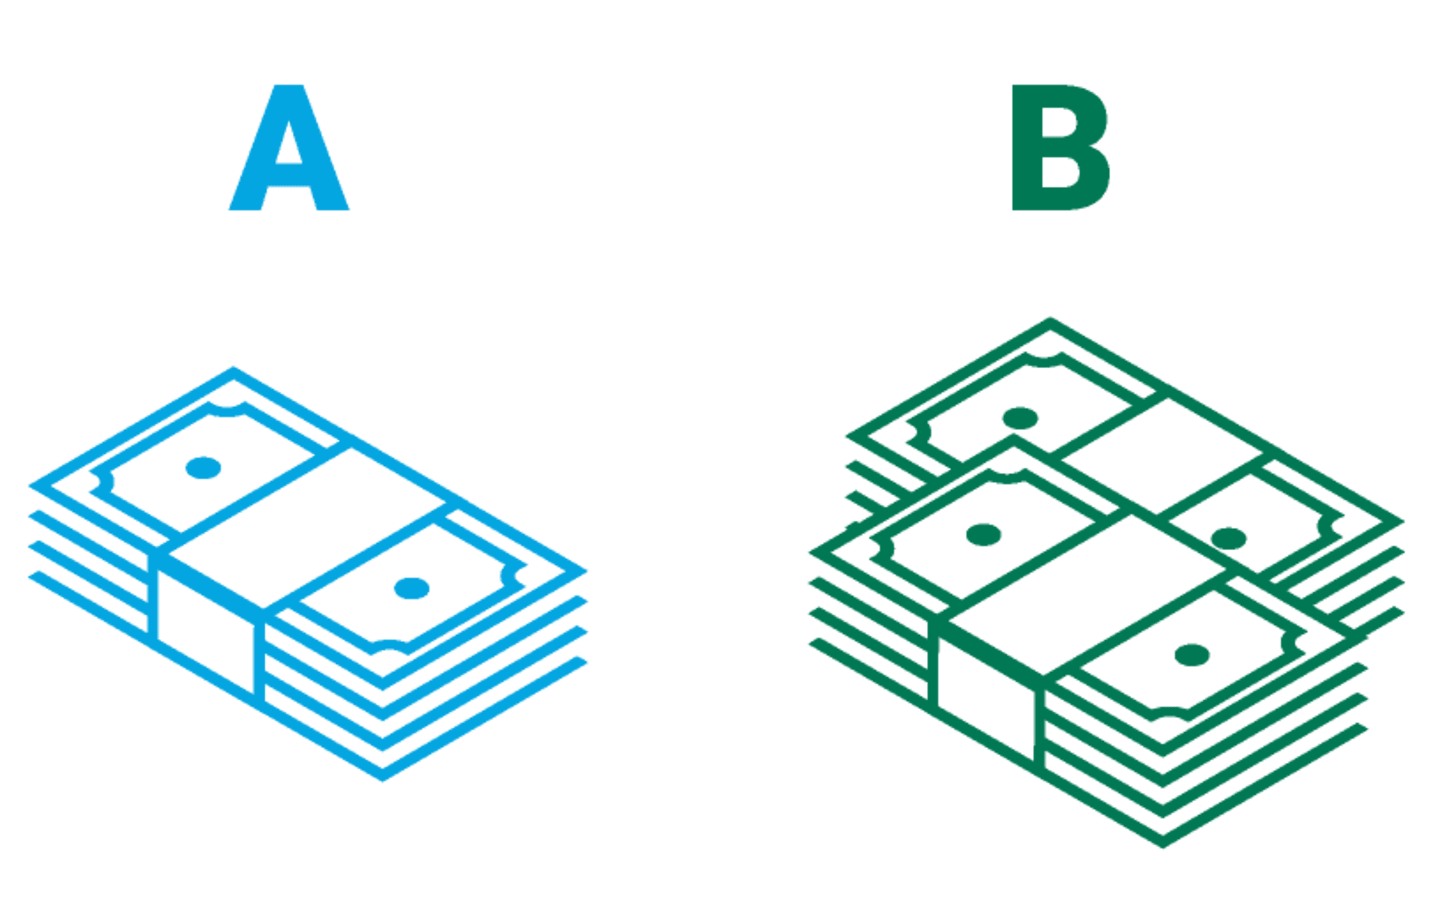 Icon of one bundle of money labeled "A" and a larger bundle of money labeled "B".